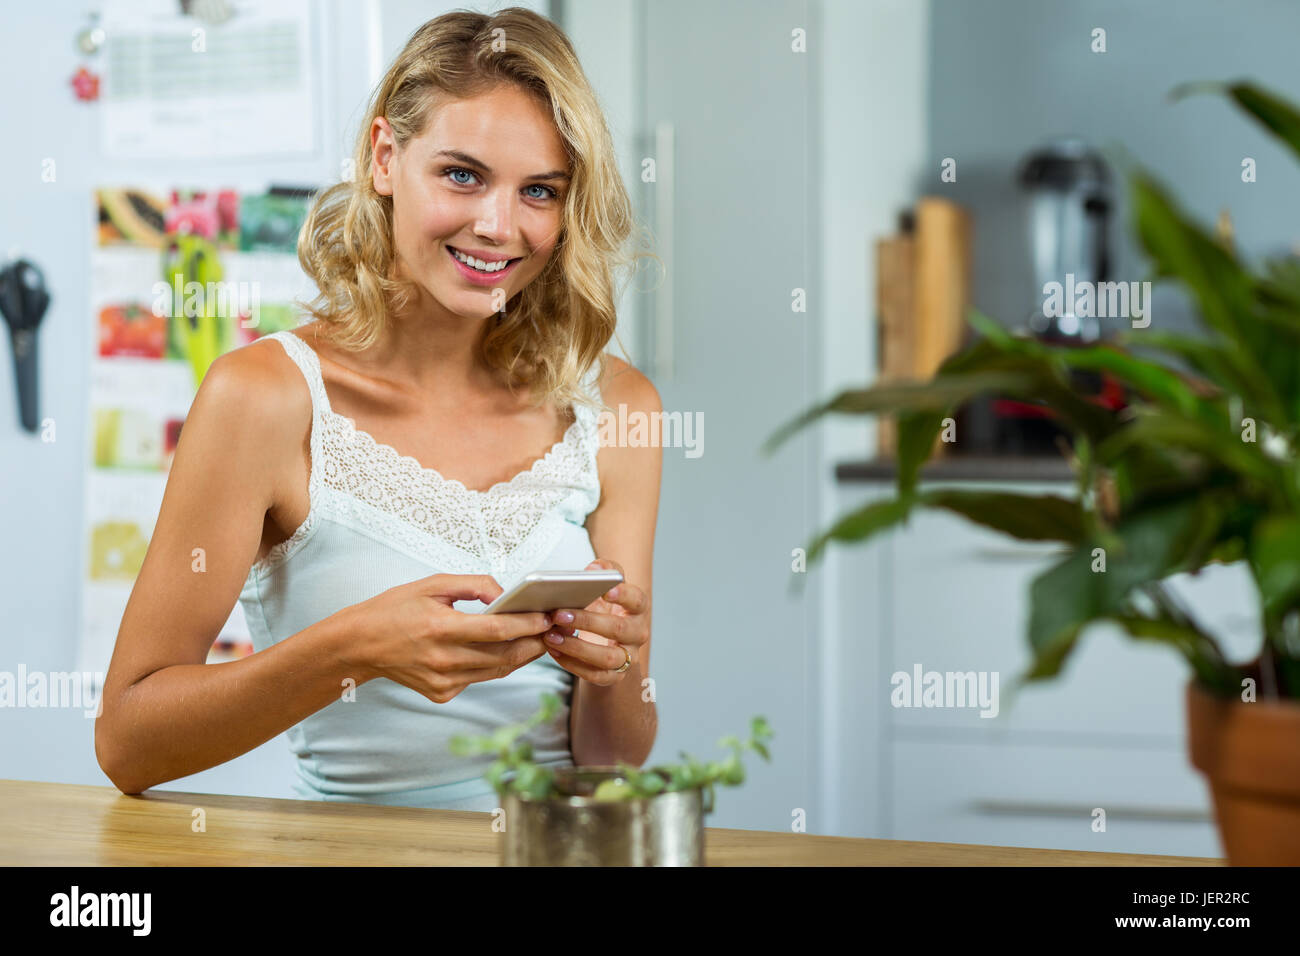 Portrait of young woman holding mobile phone Banque D'Images